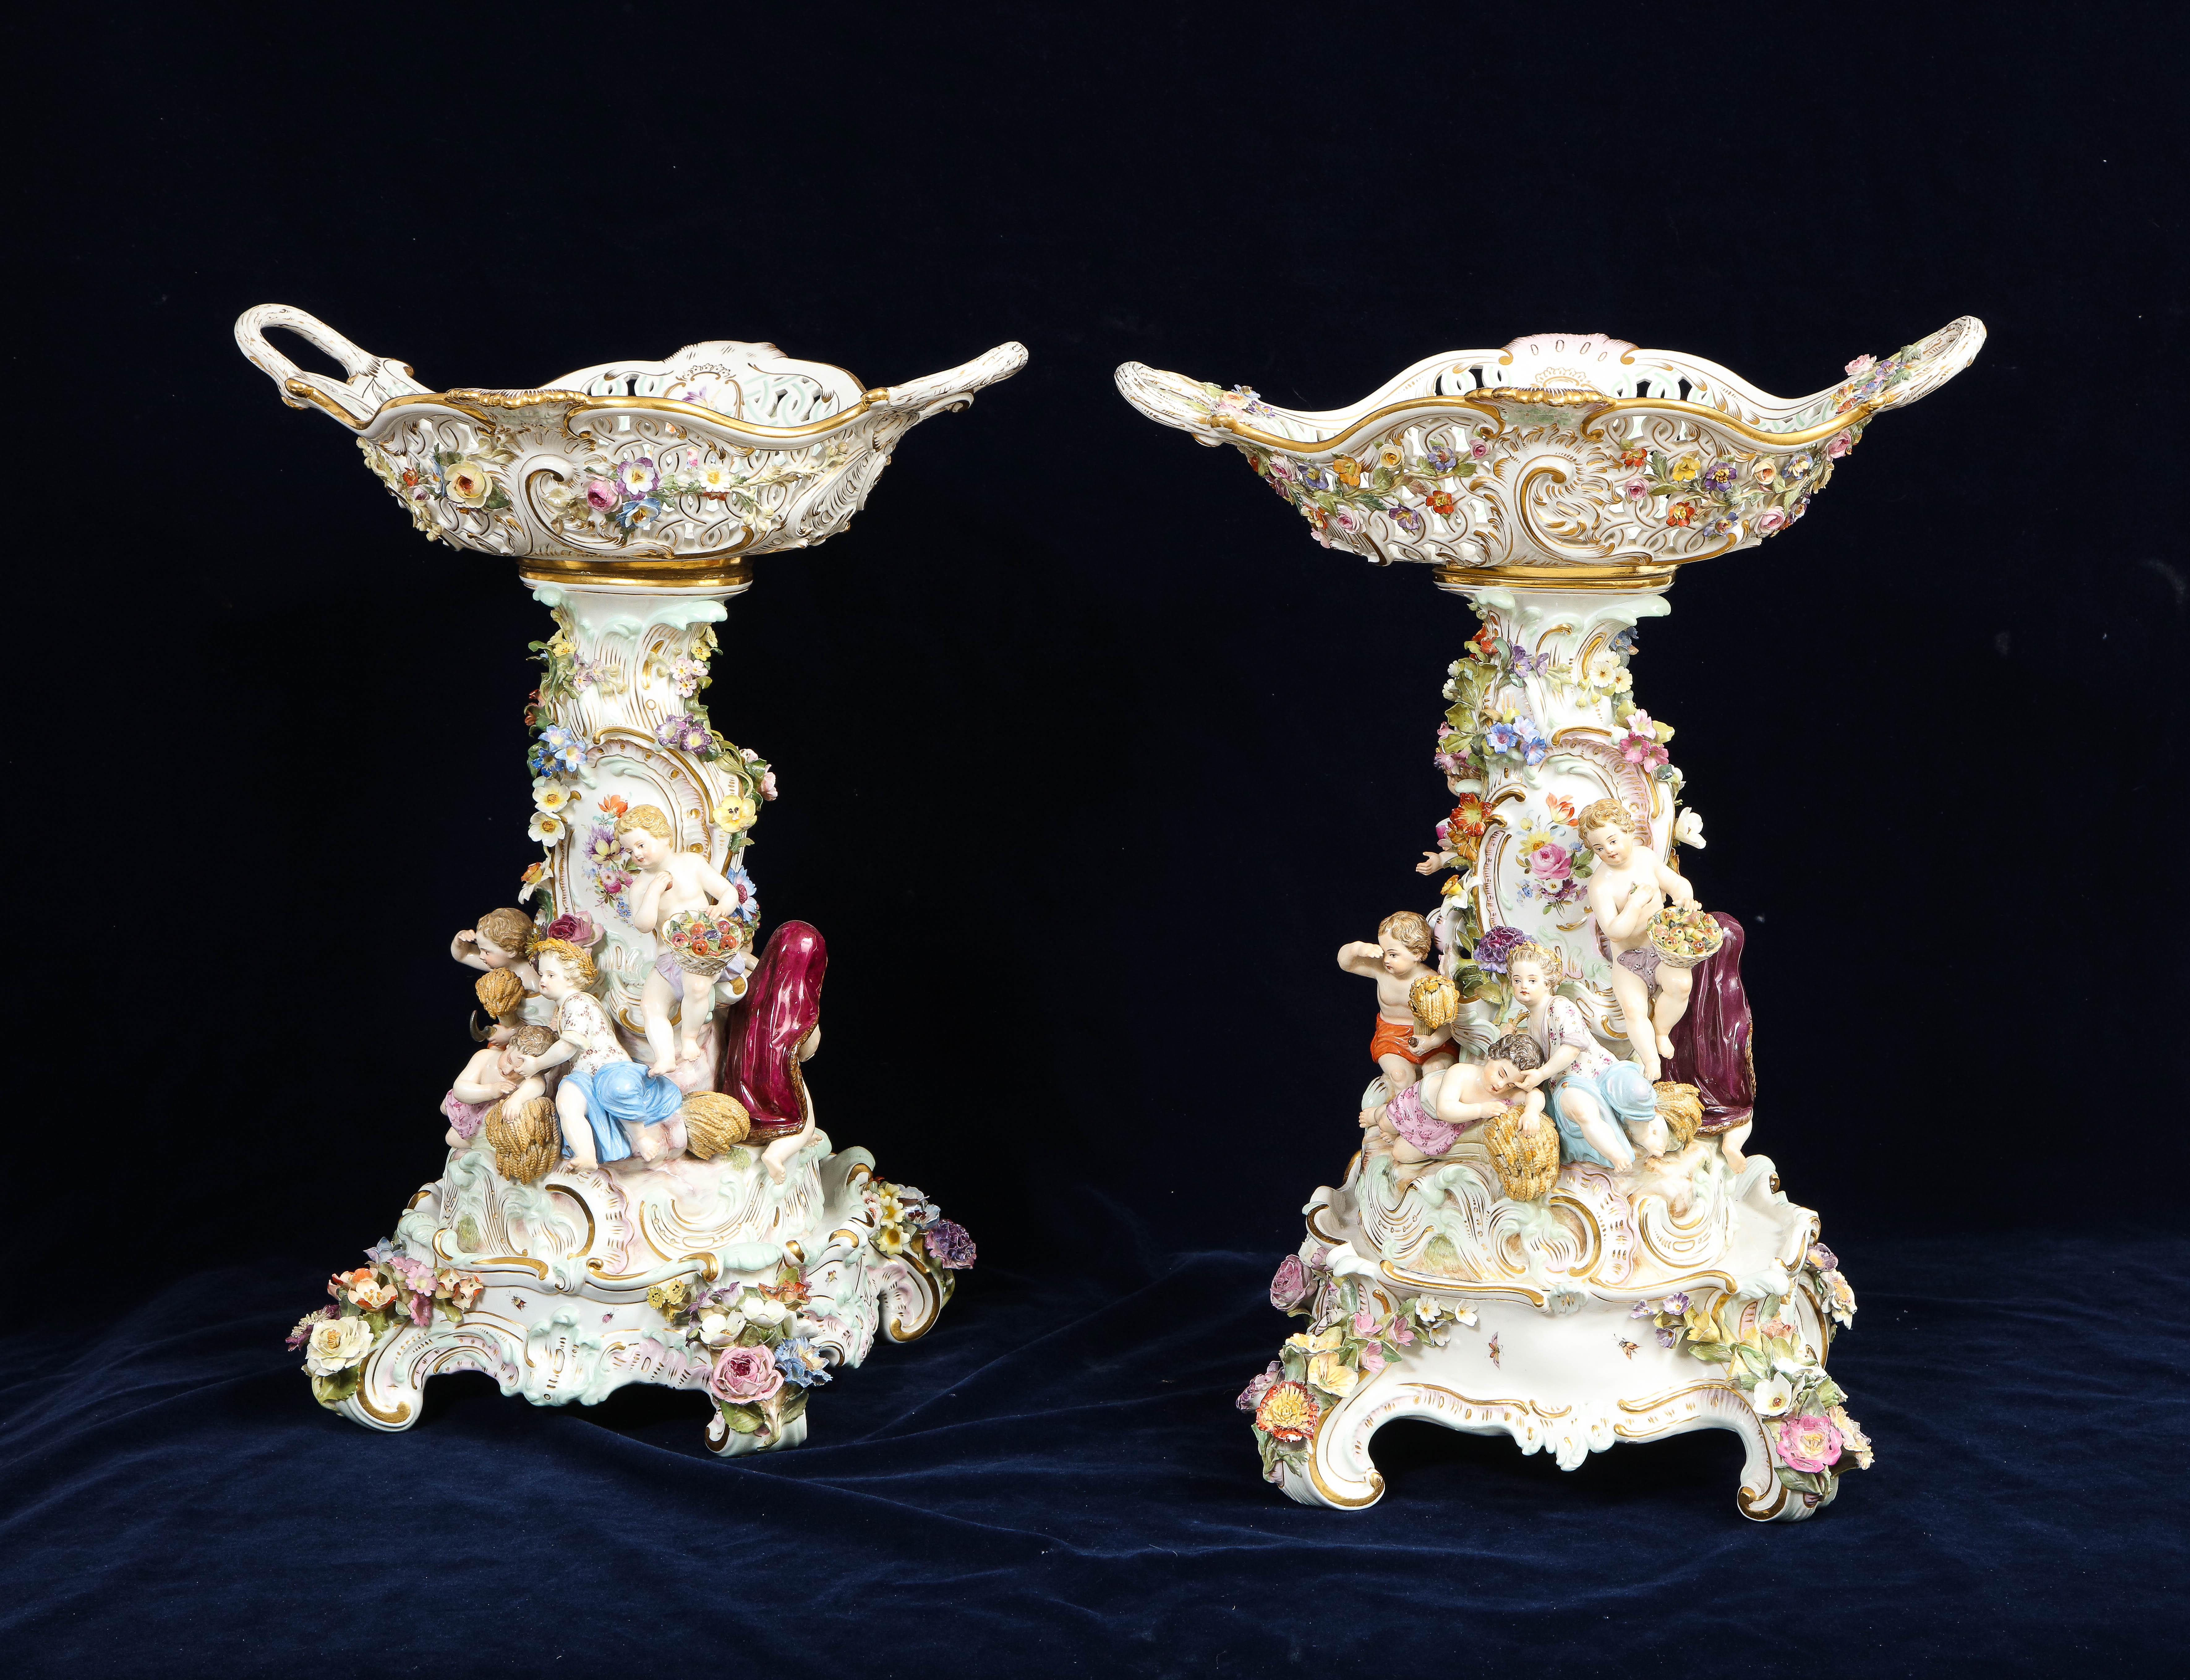 A fantastic pair of 19th century Meissen porcelain Four-Seasons Reticulated Basket-Top Centerpieces with Meissen Porcelain Bases. Each of these is emblematic of the four seasons which include summer, winter, fall and spring. They are both expertly